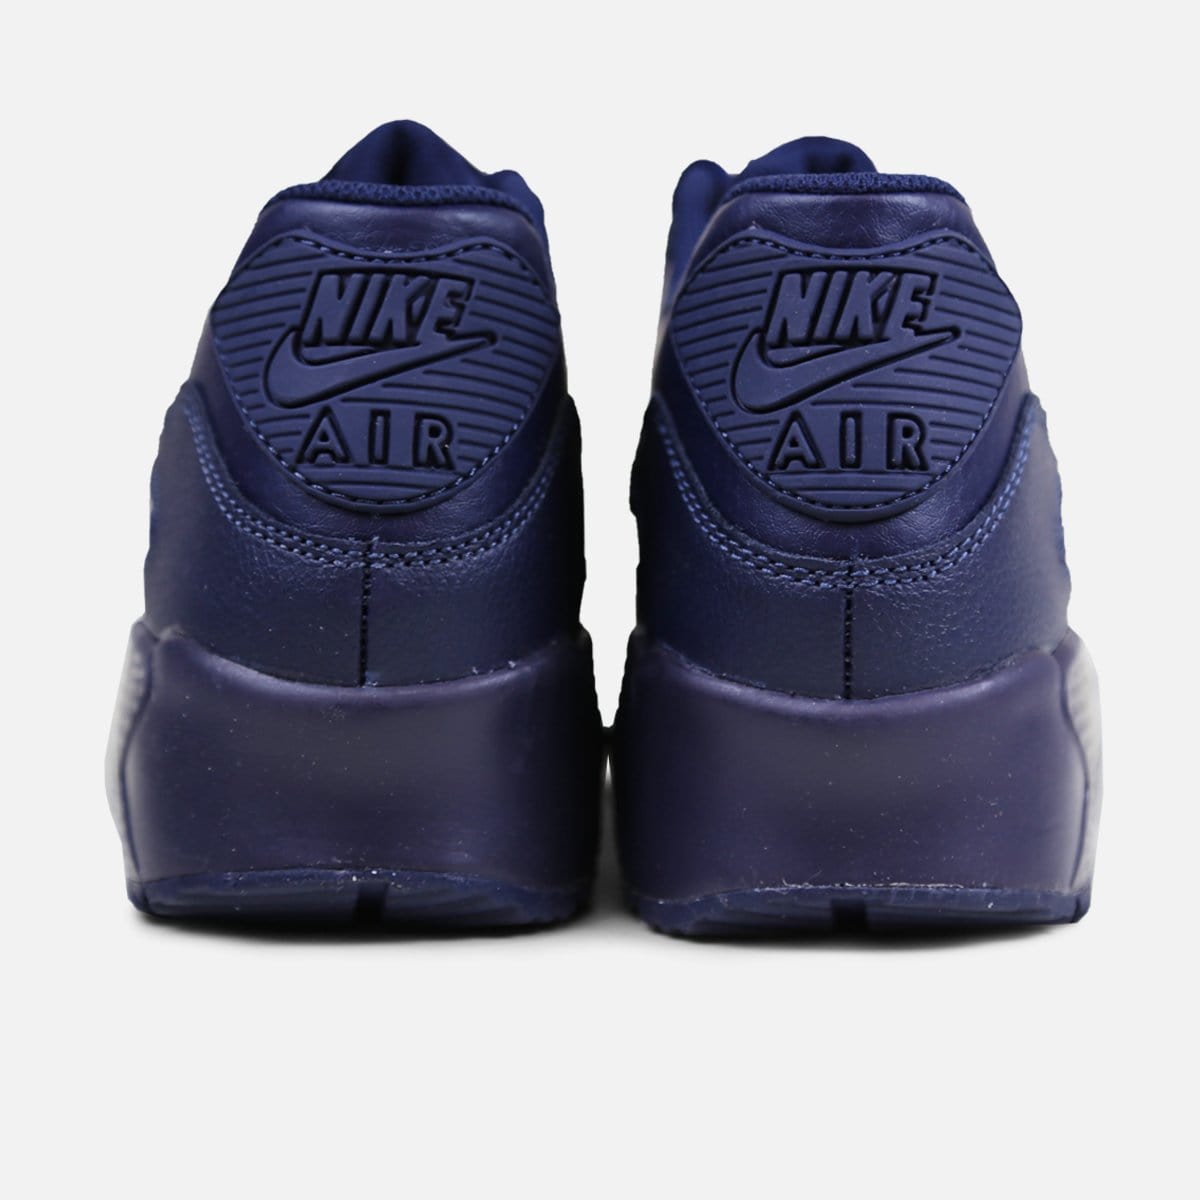 RUVilla.com is where to buy the Nike Air Max 90 Leather Grade-School (Obsidian)!